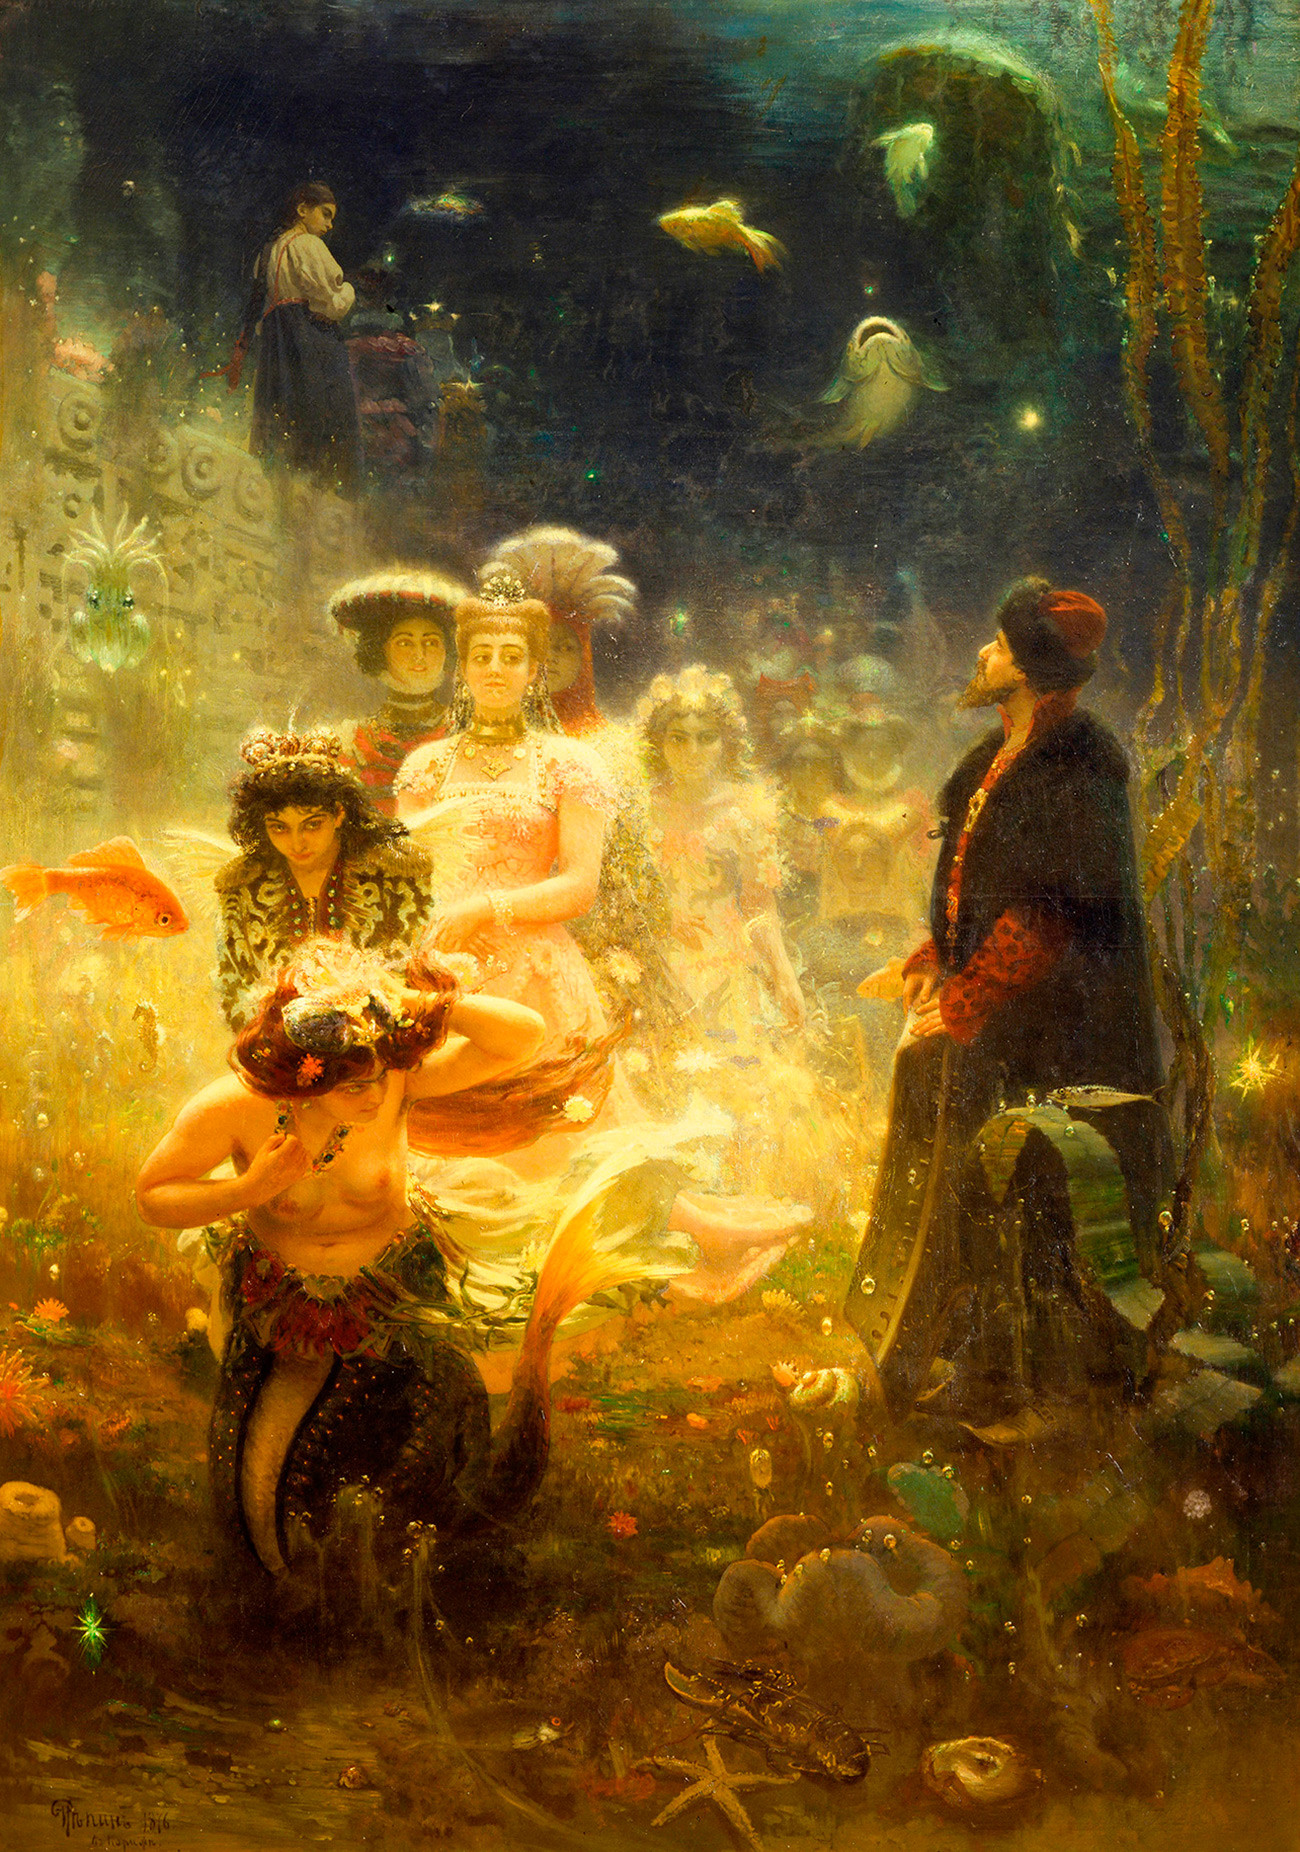 10 great paintings by Ilya Repin that everyone should know - Russia Beyond